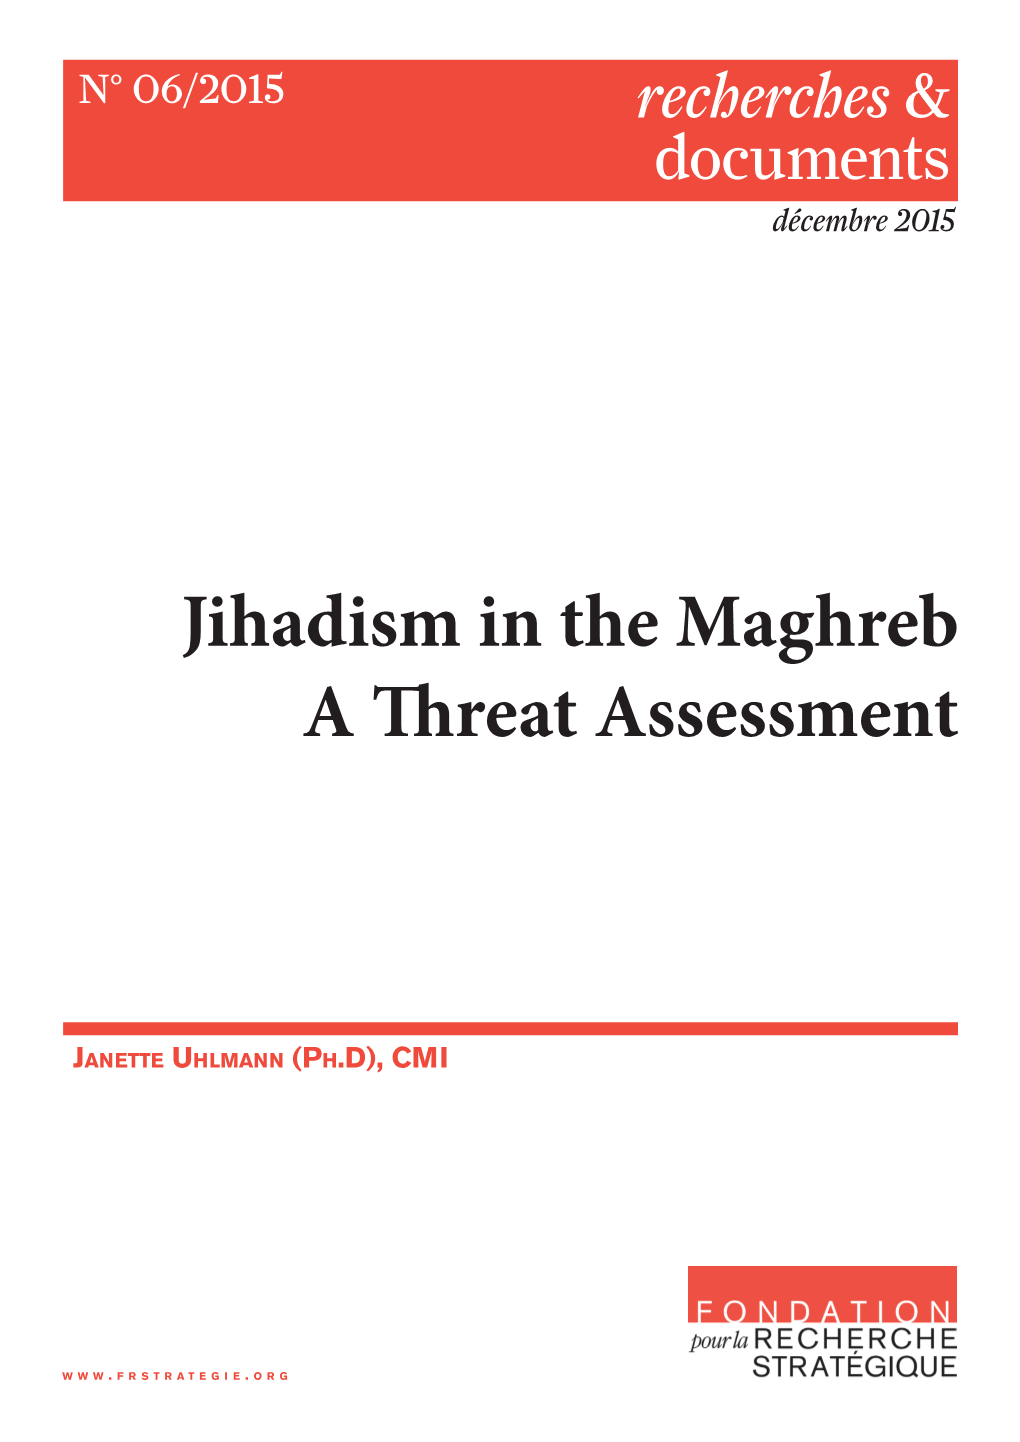 Jihadism in the Maghreb a Threat Assessment